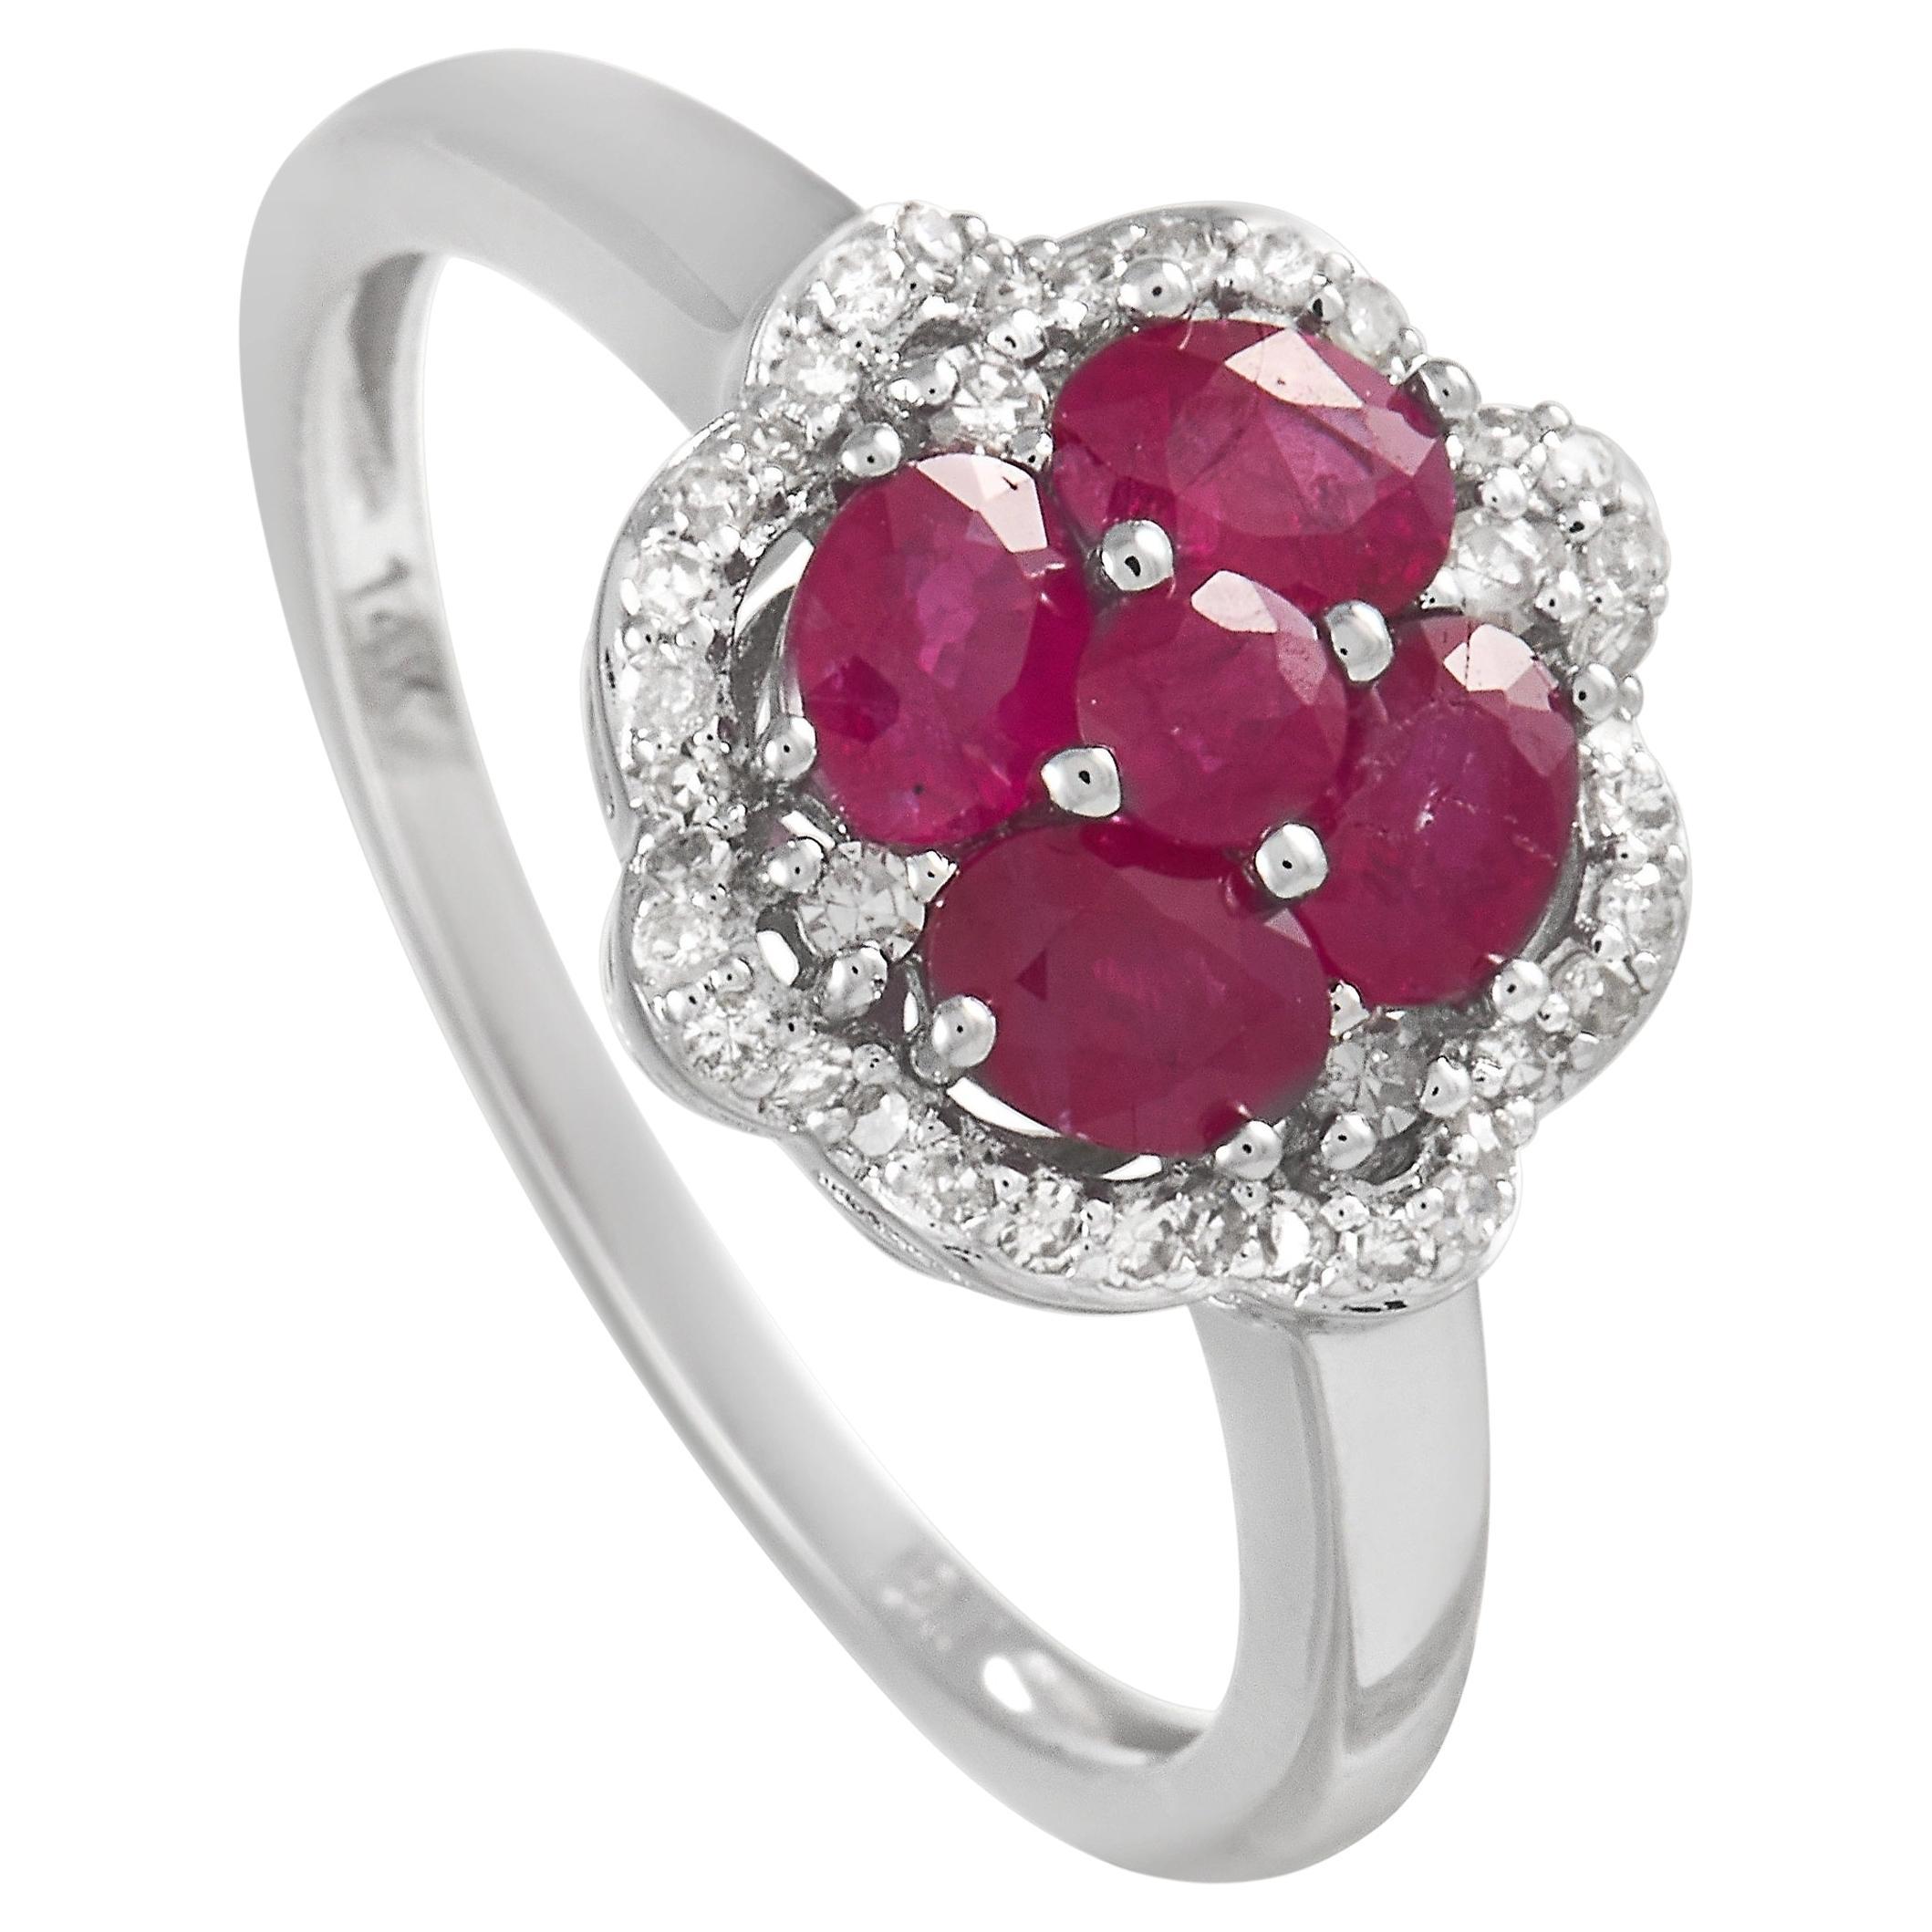 LB Exclusive 14K White Gold 0.18ct Diamond and Ruby Ring